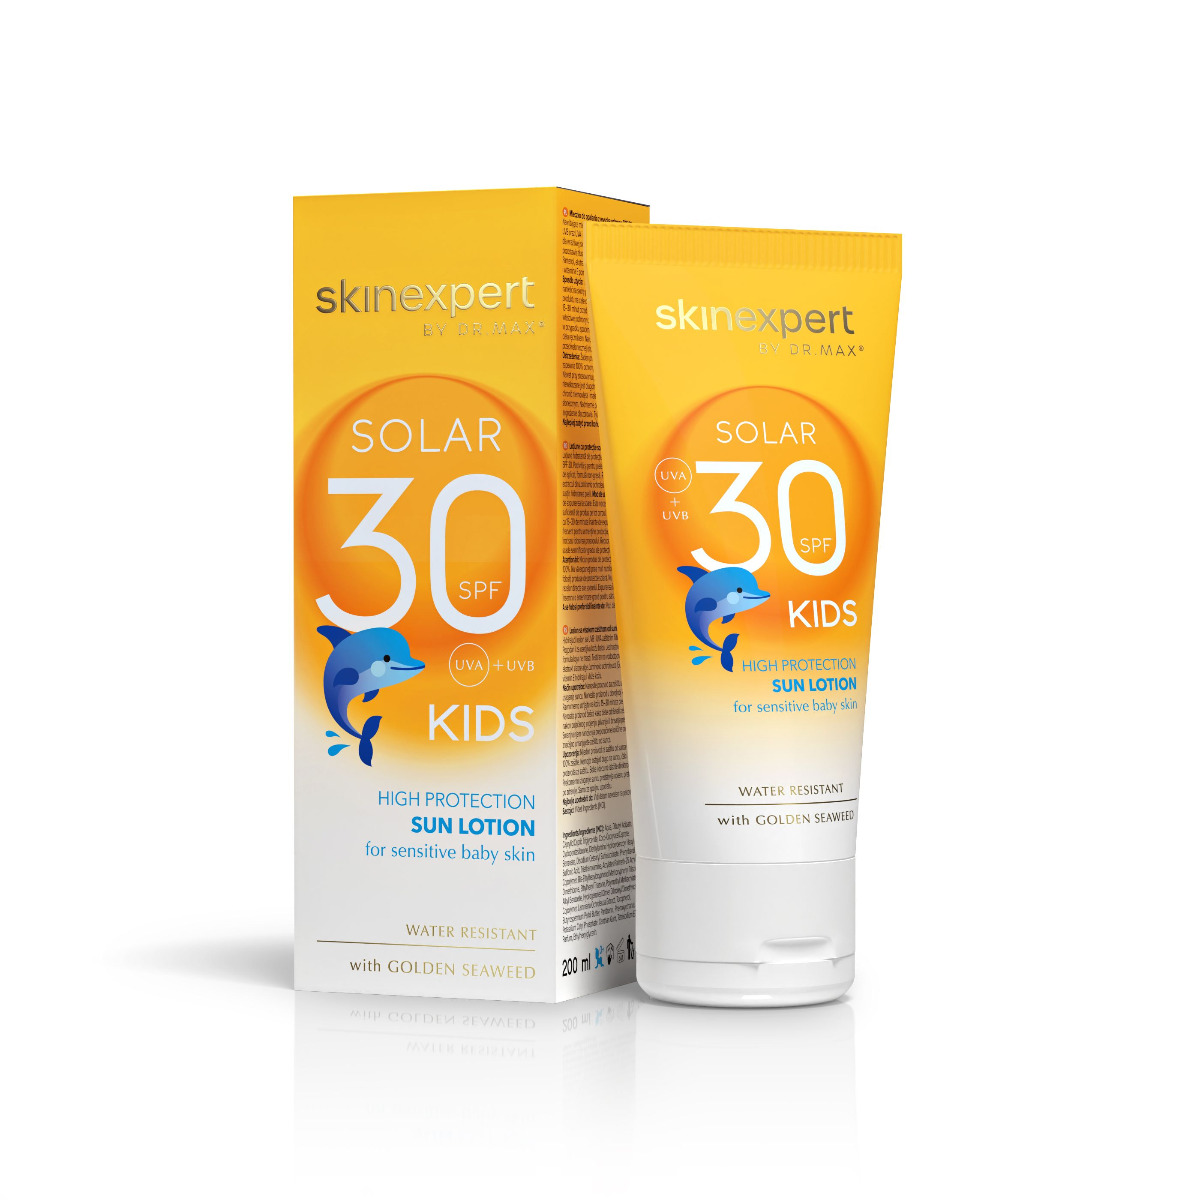 skinexpert BY DR.MAX SOLAR Sun Lotion Kids SPF30 200 ml skinexpert BY DR.MAX SOLAR